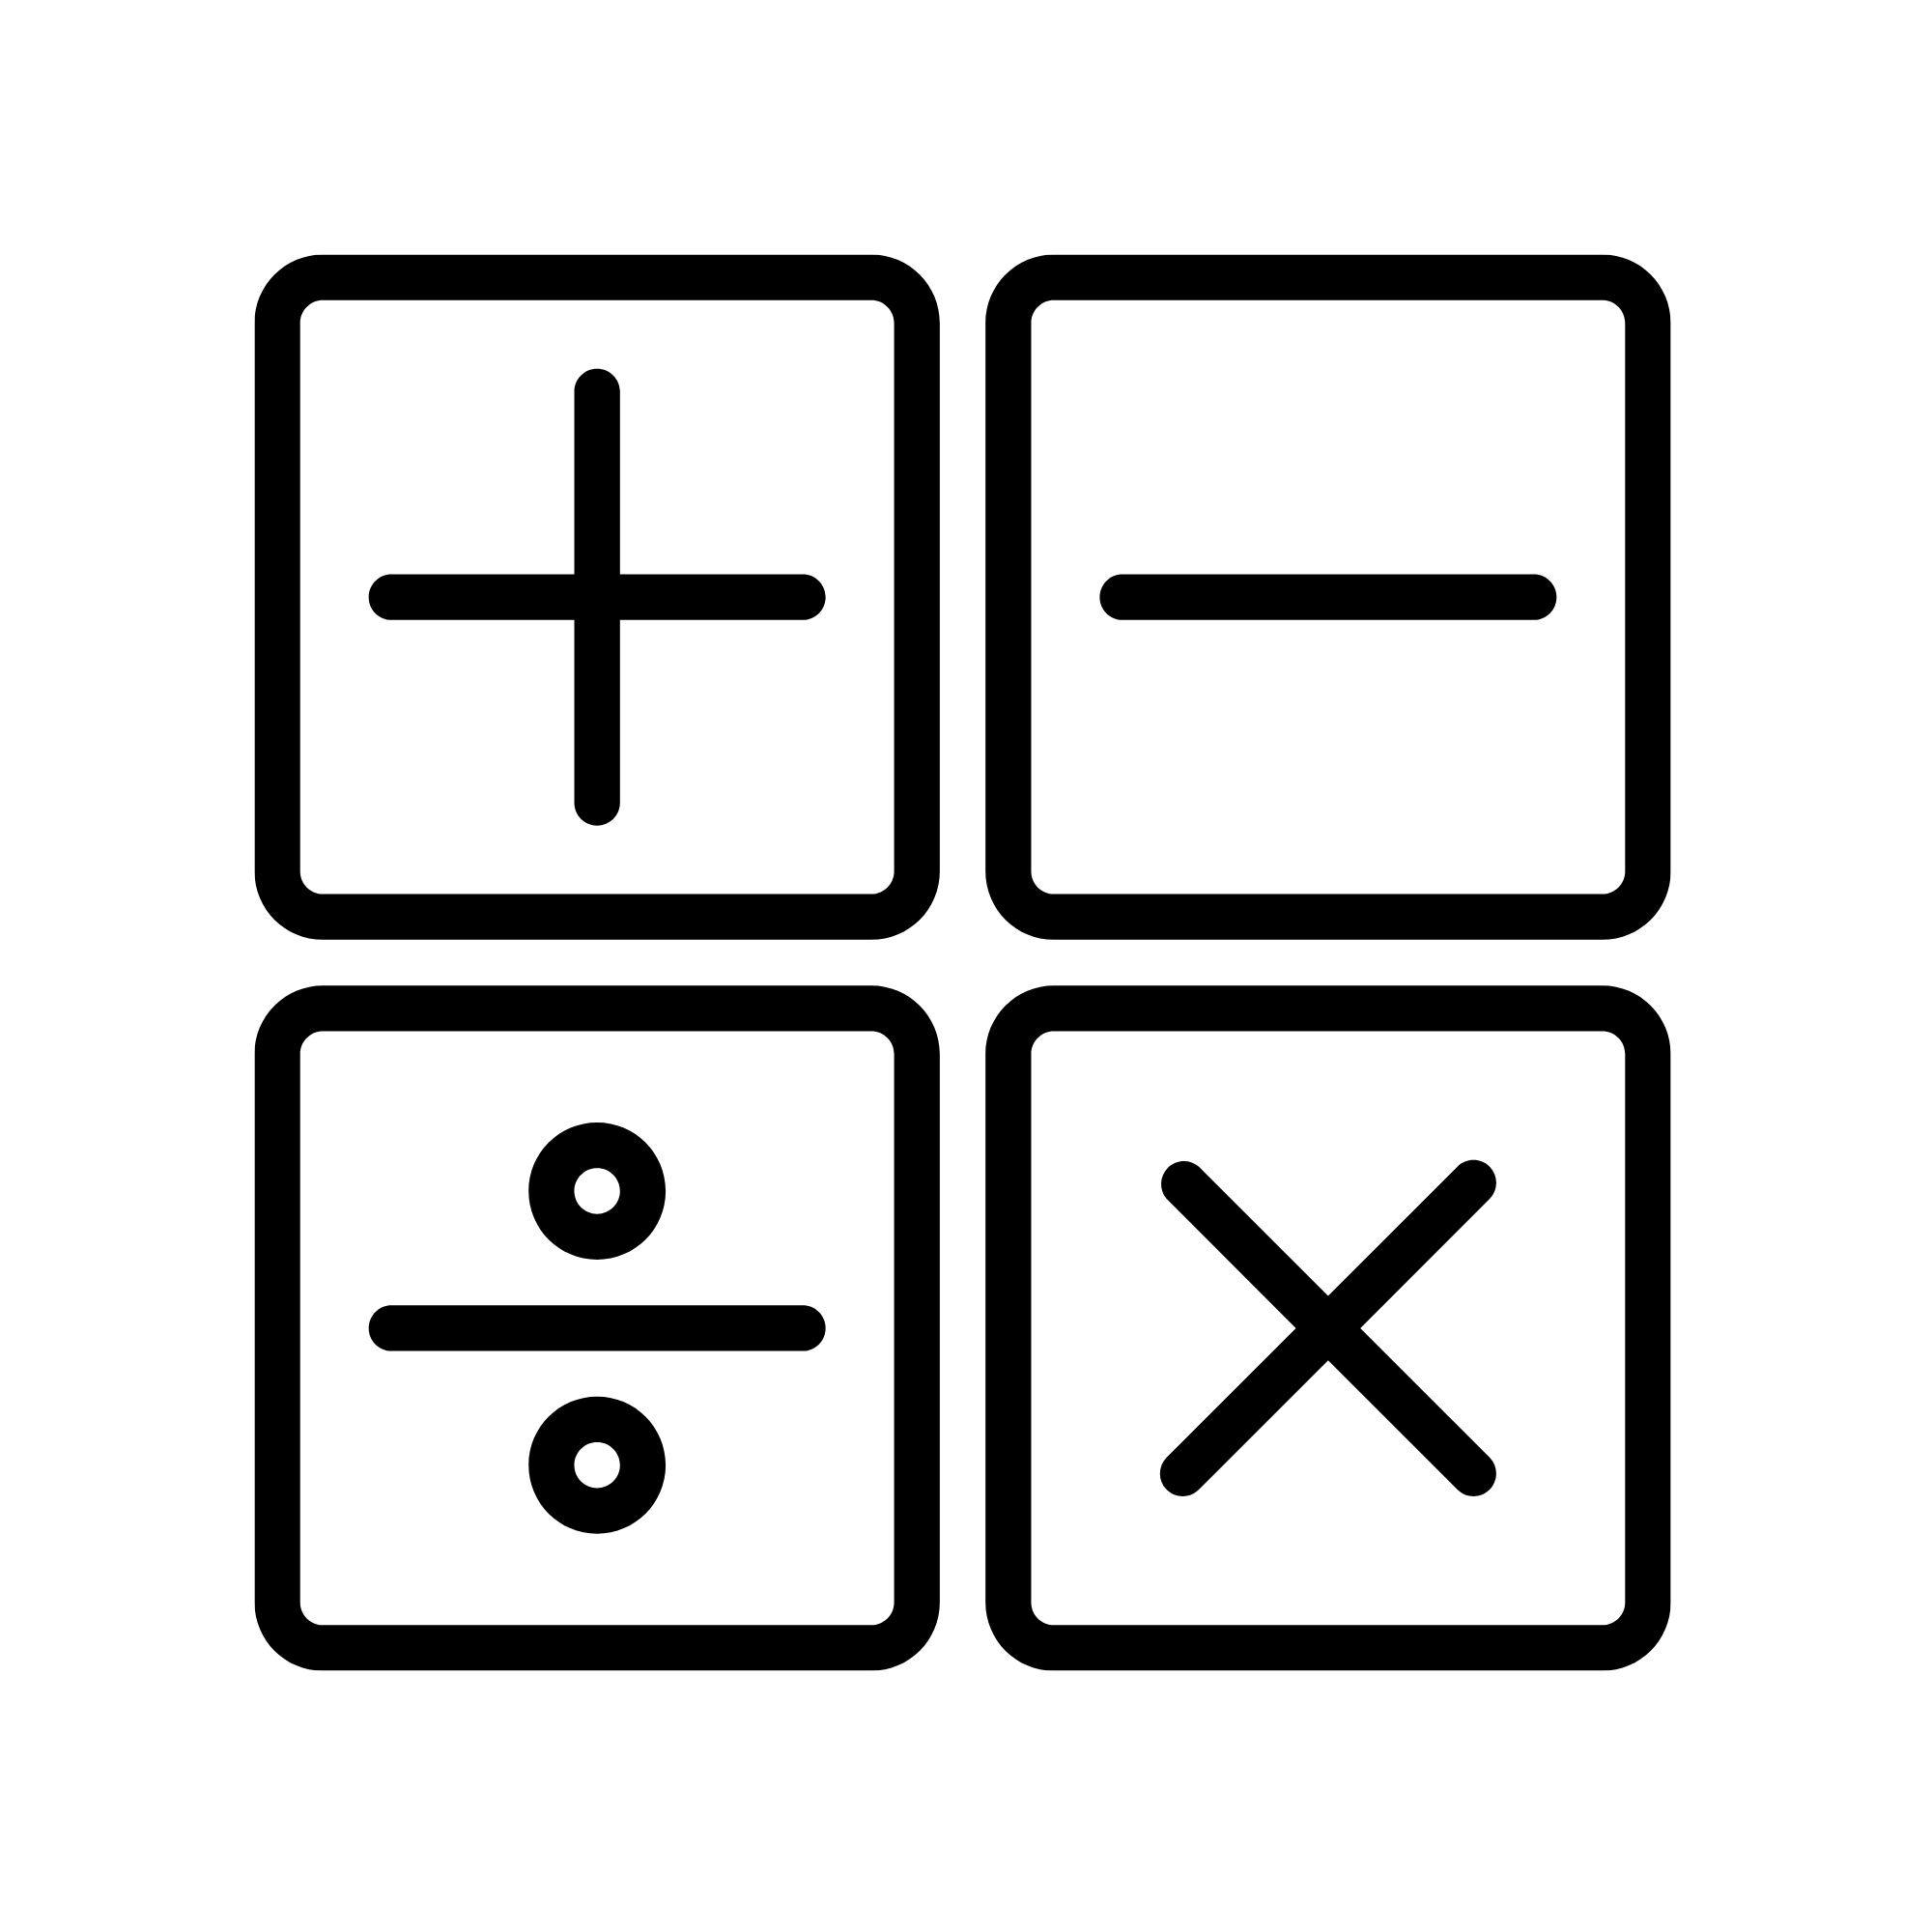 graphic of math symbols: addition, subtraction, division, multiplication